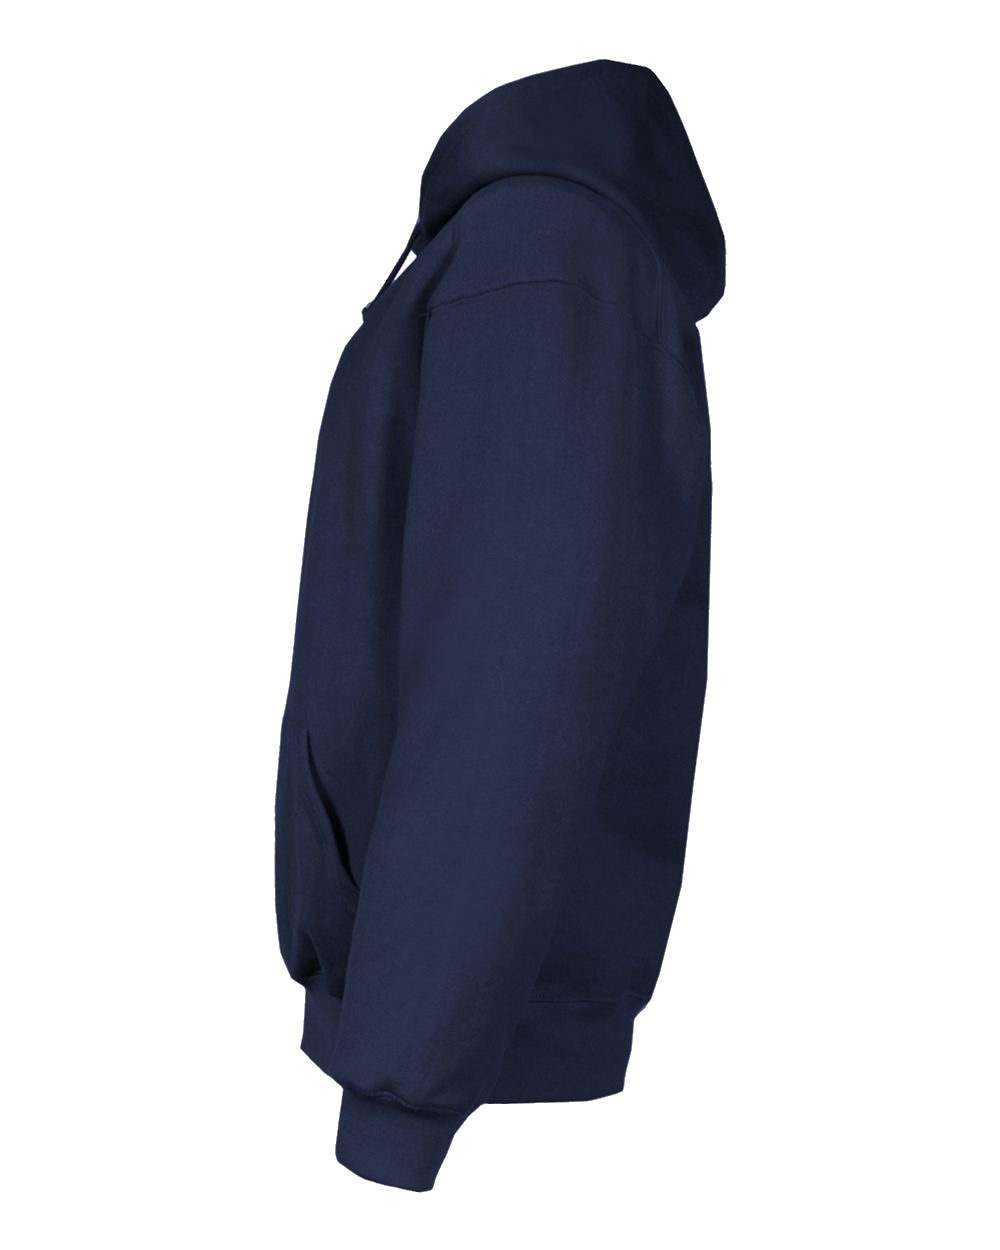 Badger Sport 2254 Youth Hooded Sweatshirt - Navy - HIT a Double - 1